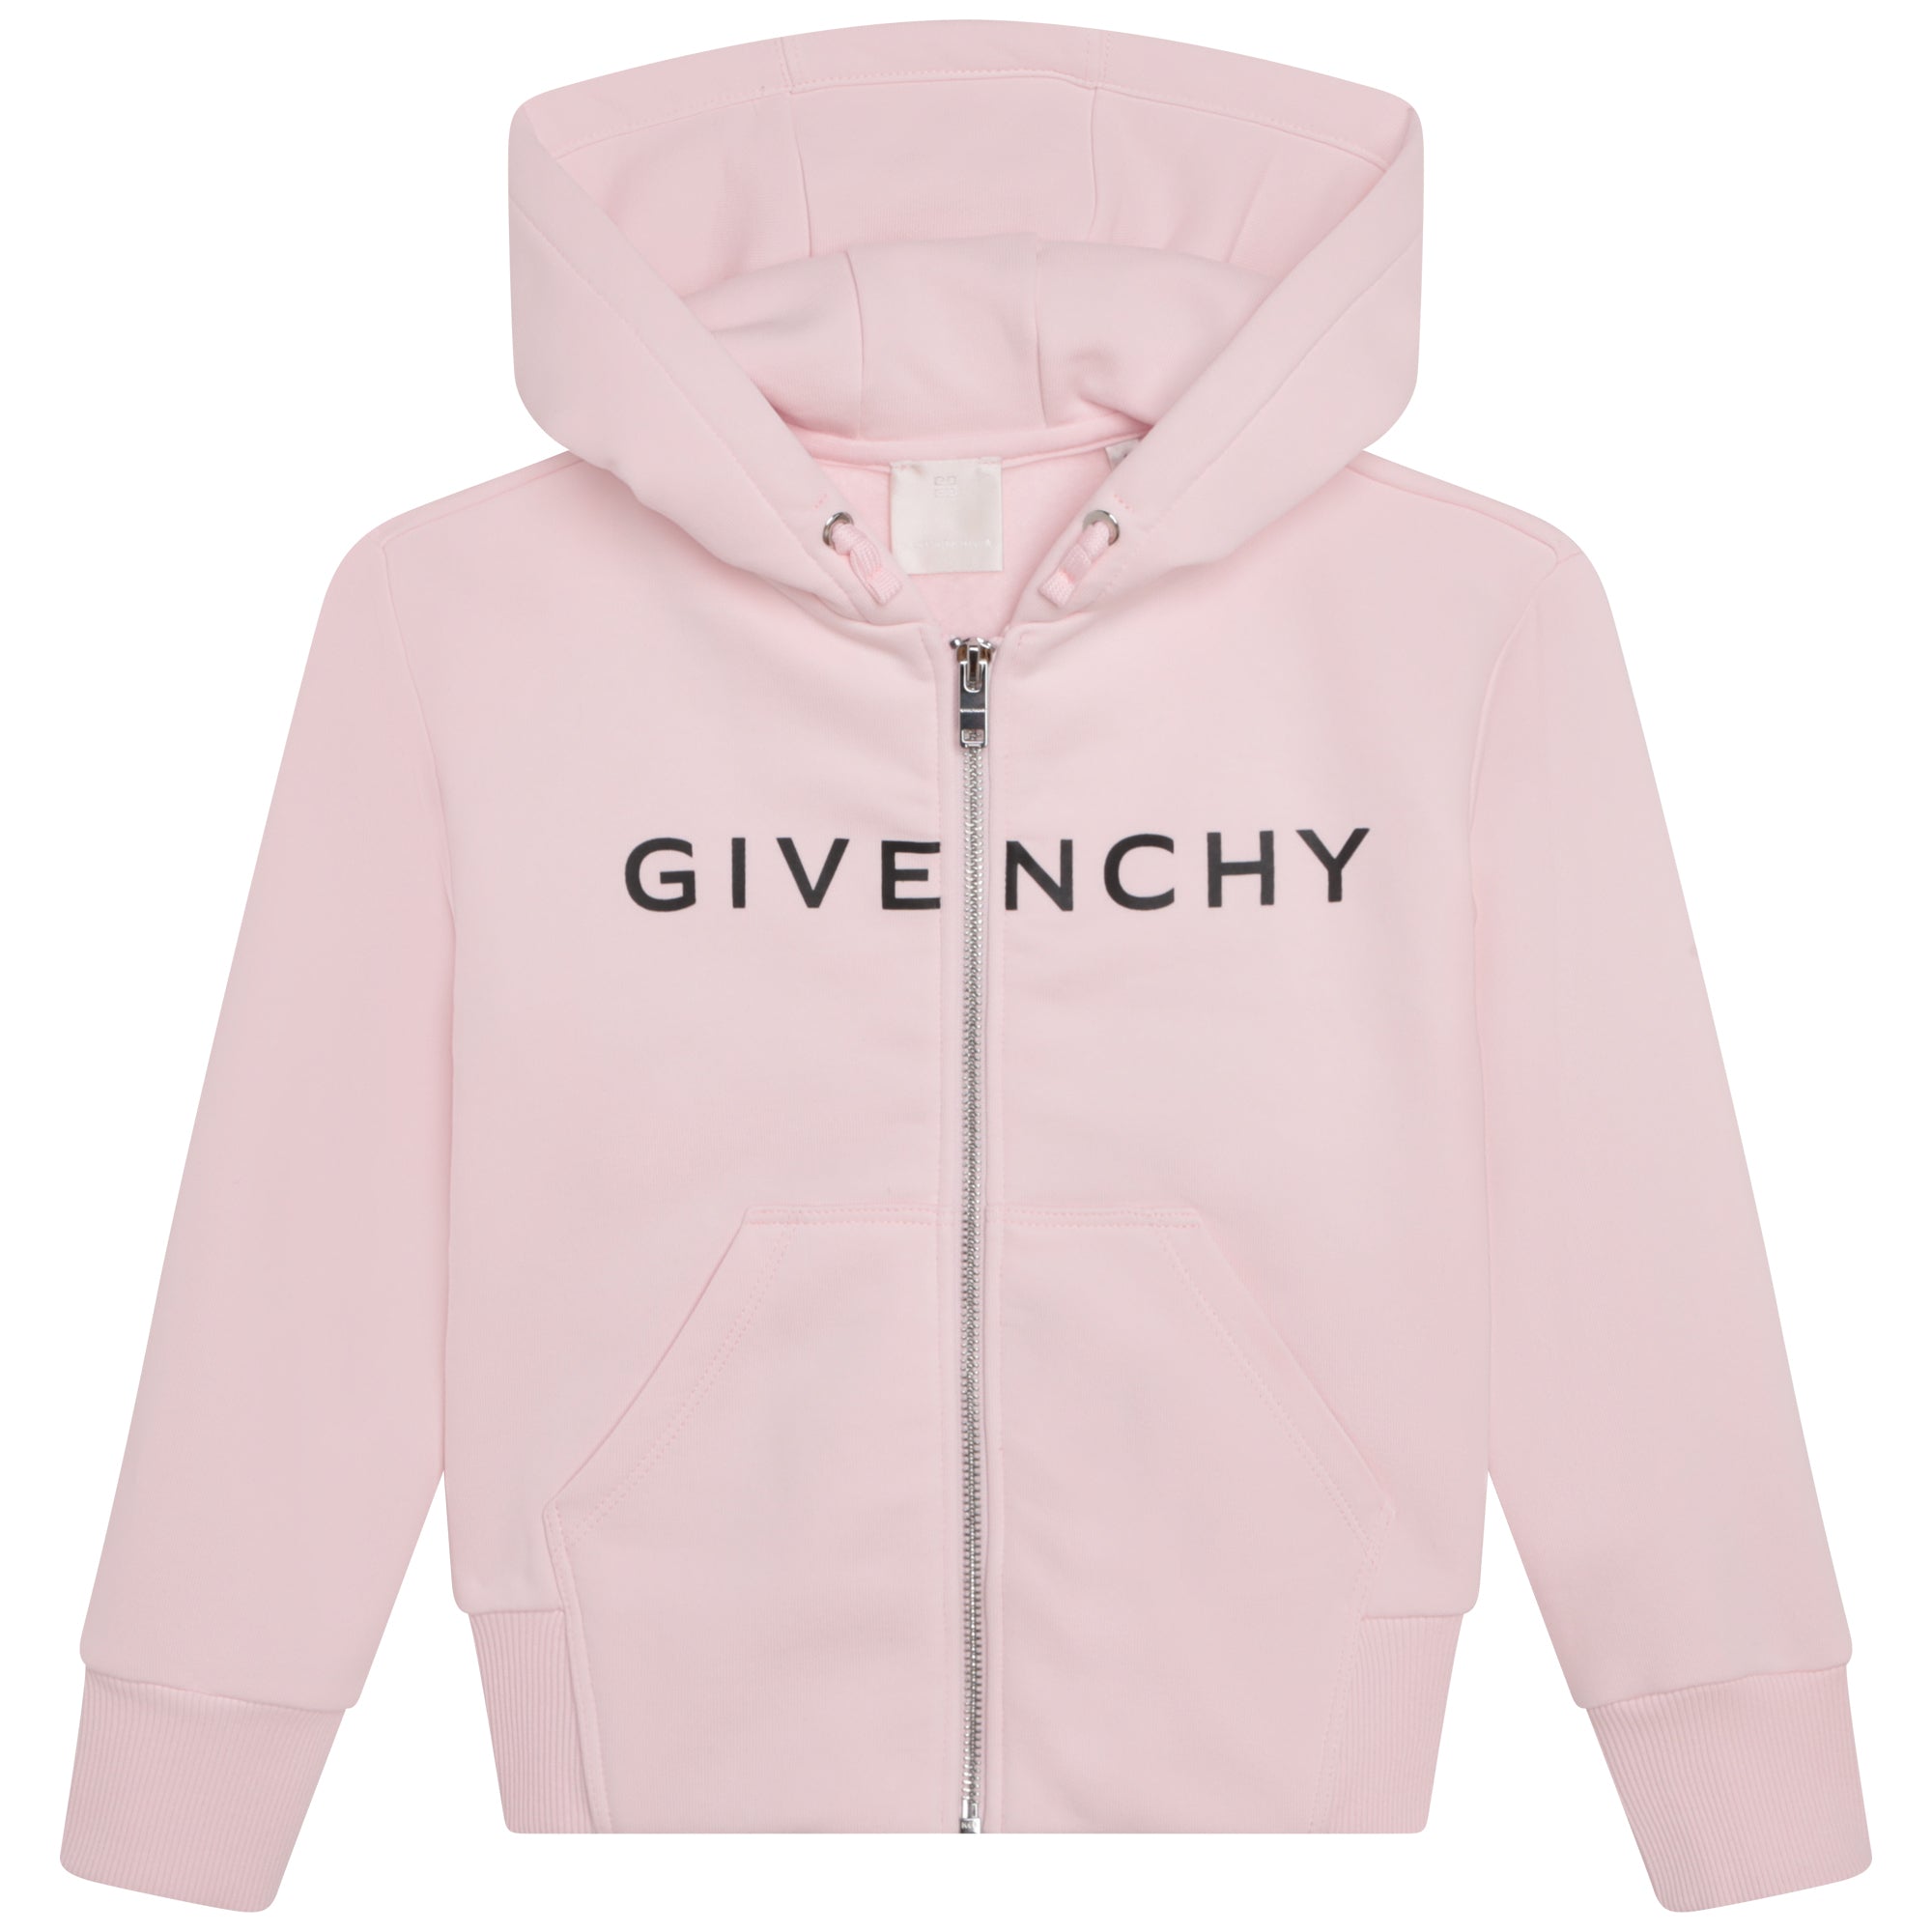 GIRLS HOODED ZIP SWEATSHIRT WITH LOGO DETAILS ON FRONT AND BACK